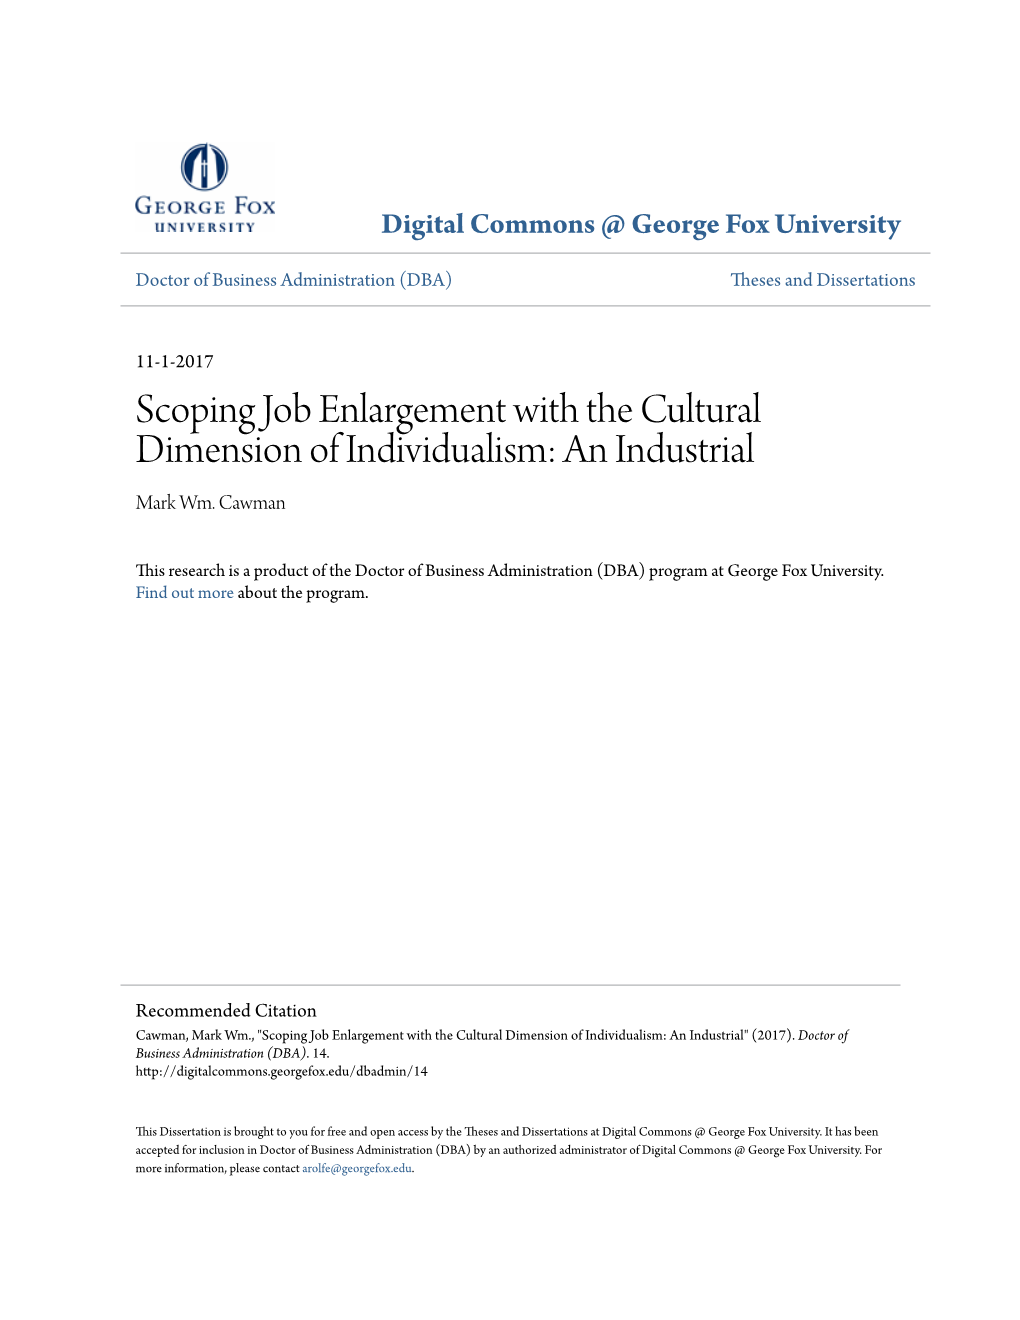 Scoping Job Enlargement with the Cultural Dimension of Individualism: an Industrial Mark Wm